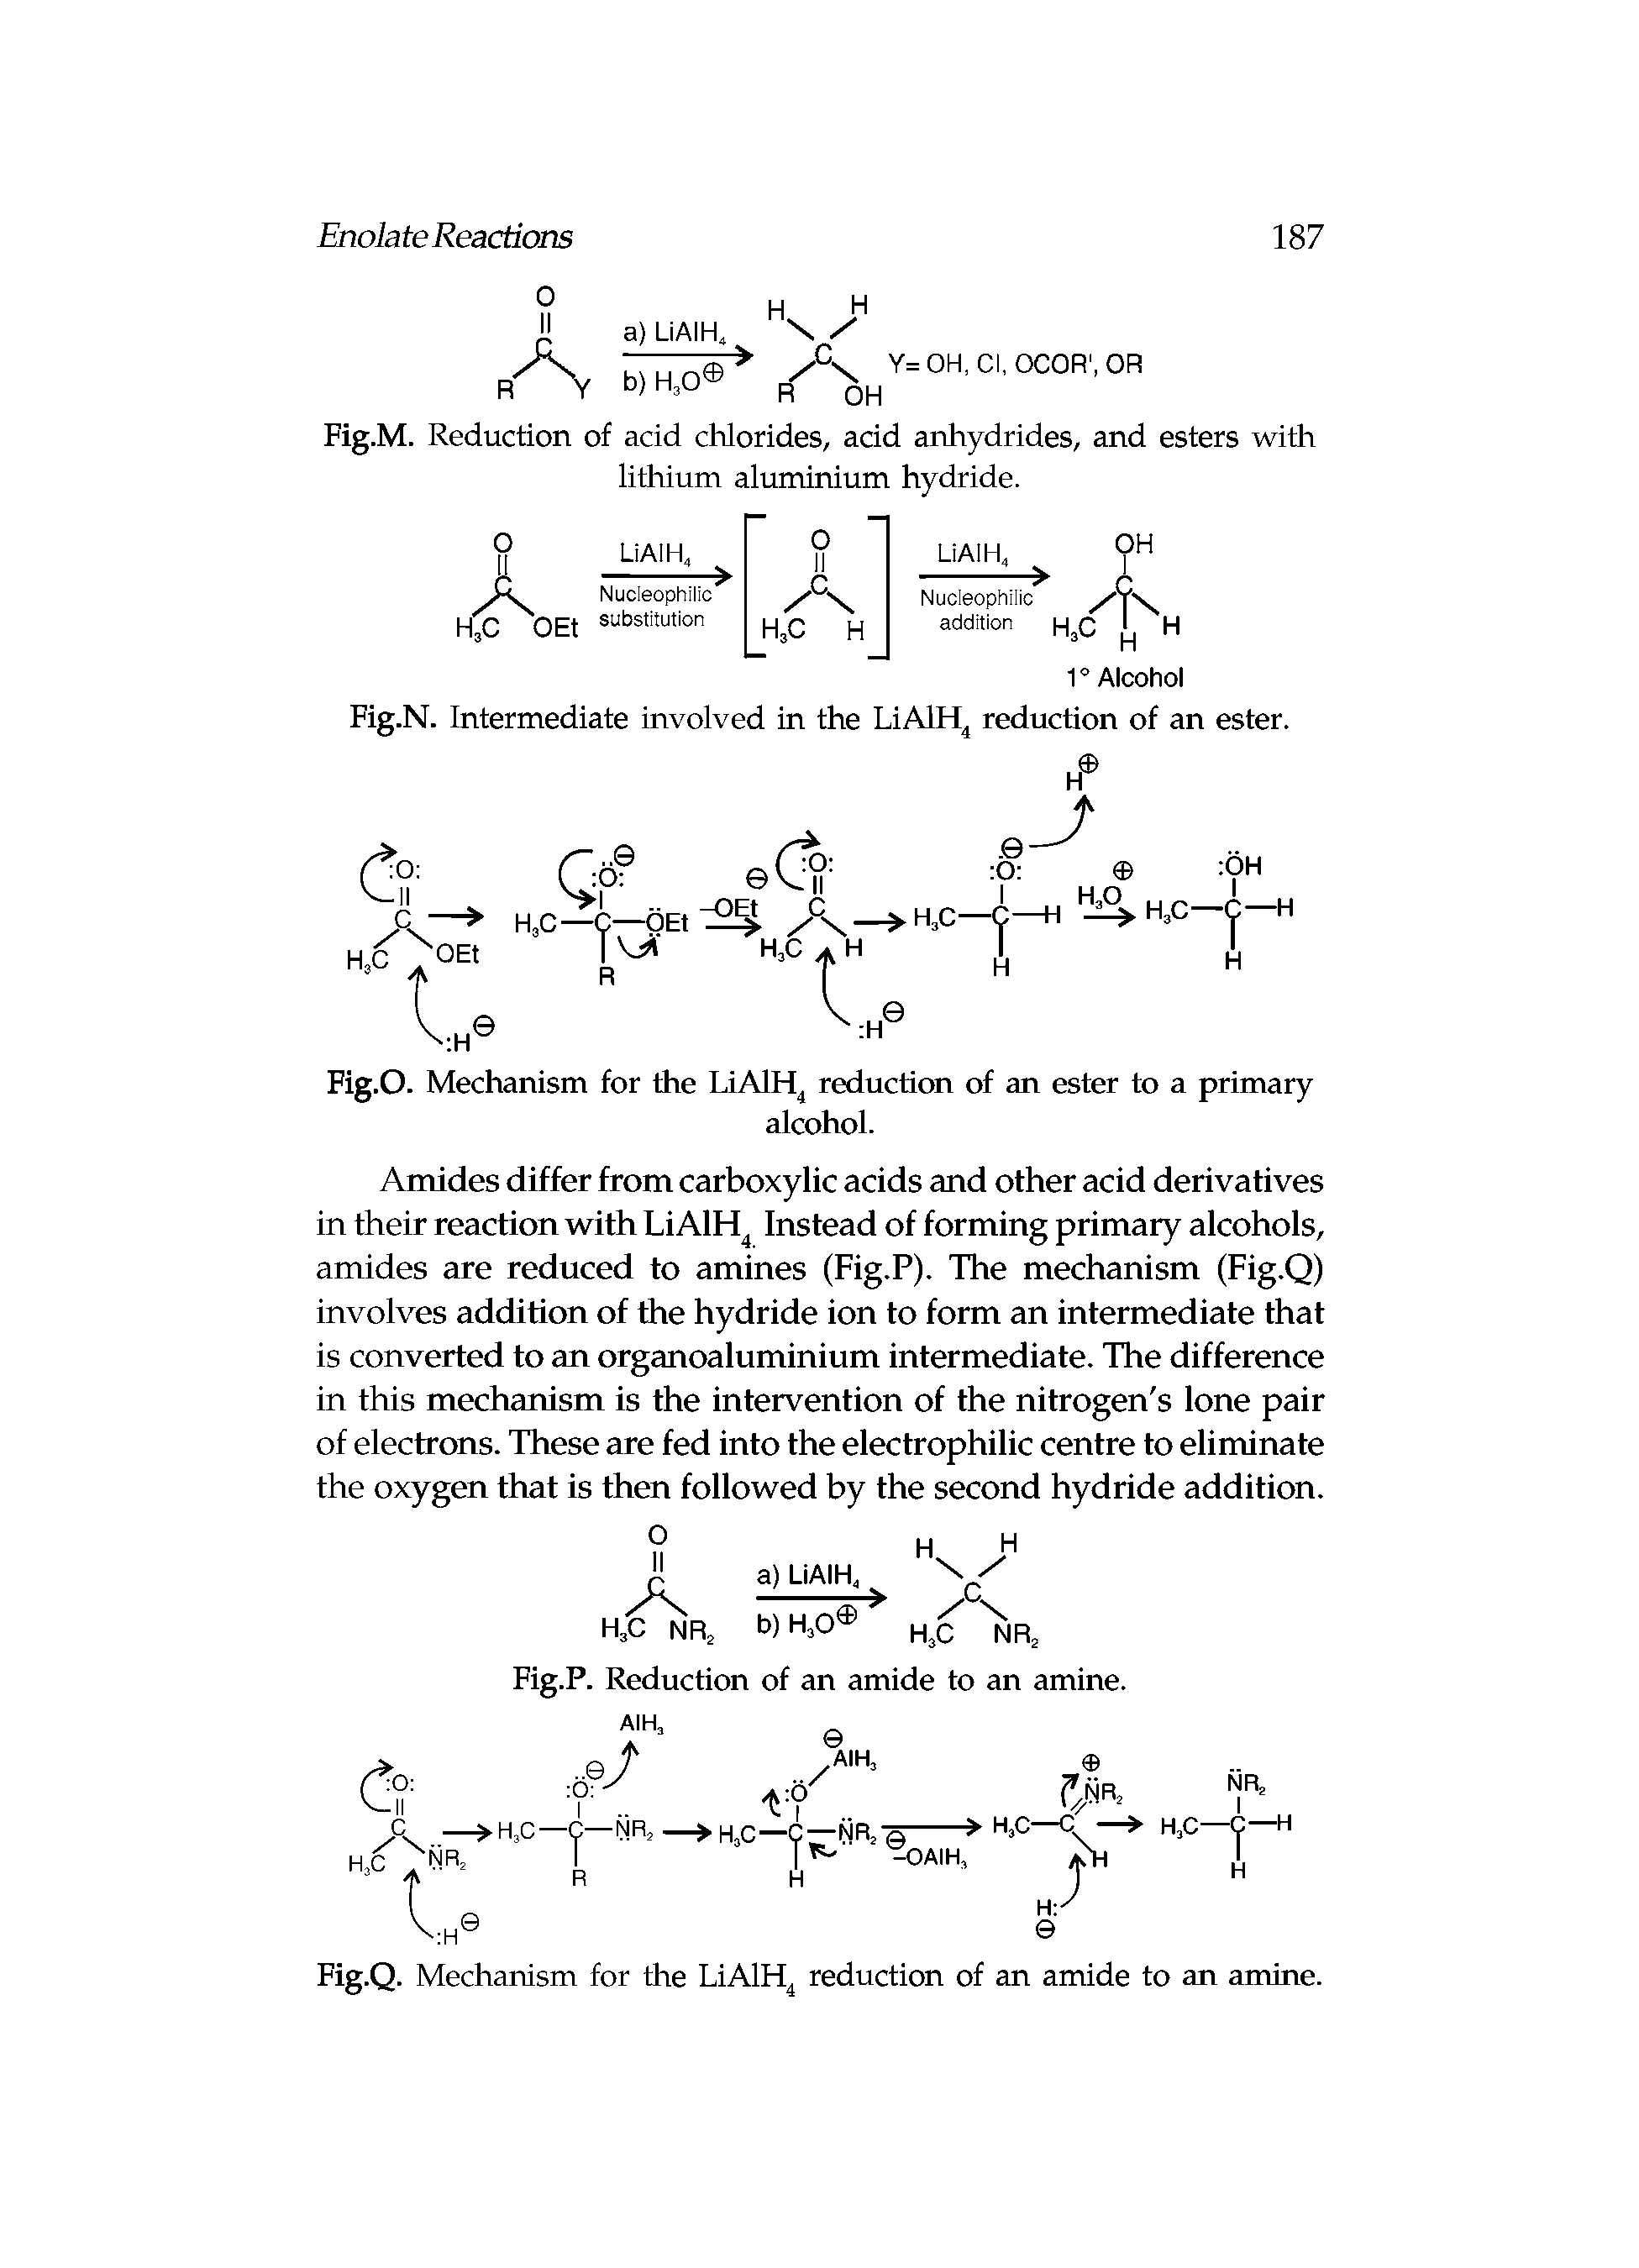 Fig.M. Reduction of acid chlorides, acid anhydrides, and esters with lithium aluminium hydride.